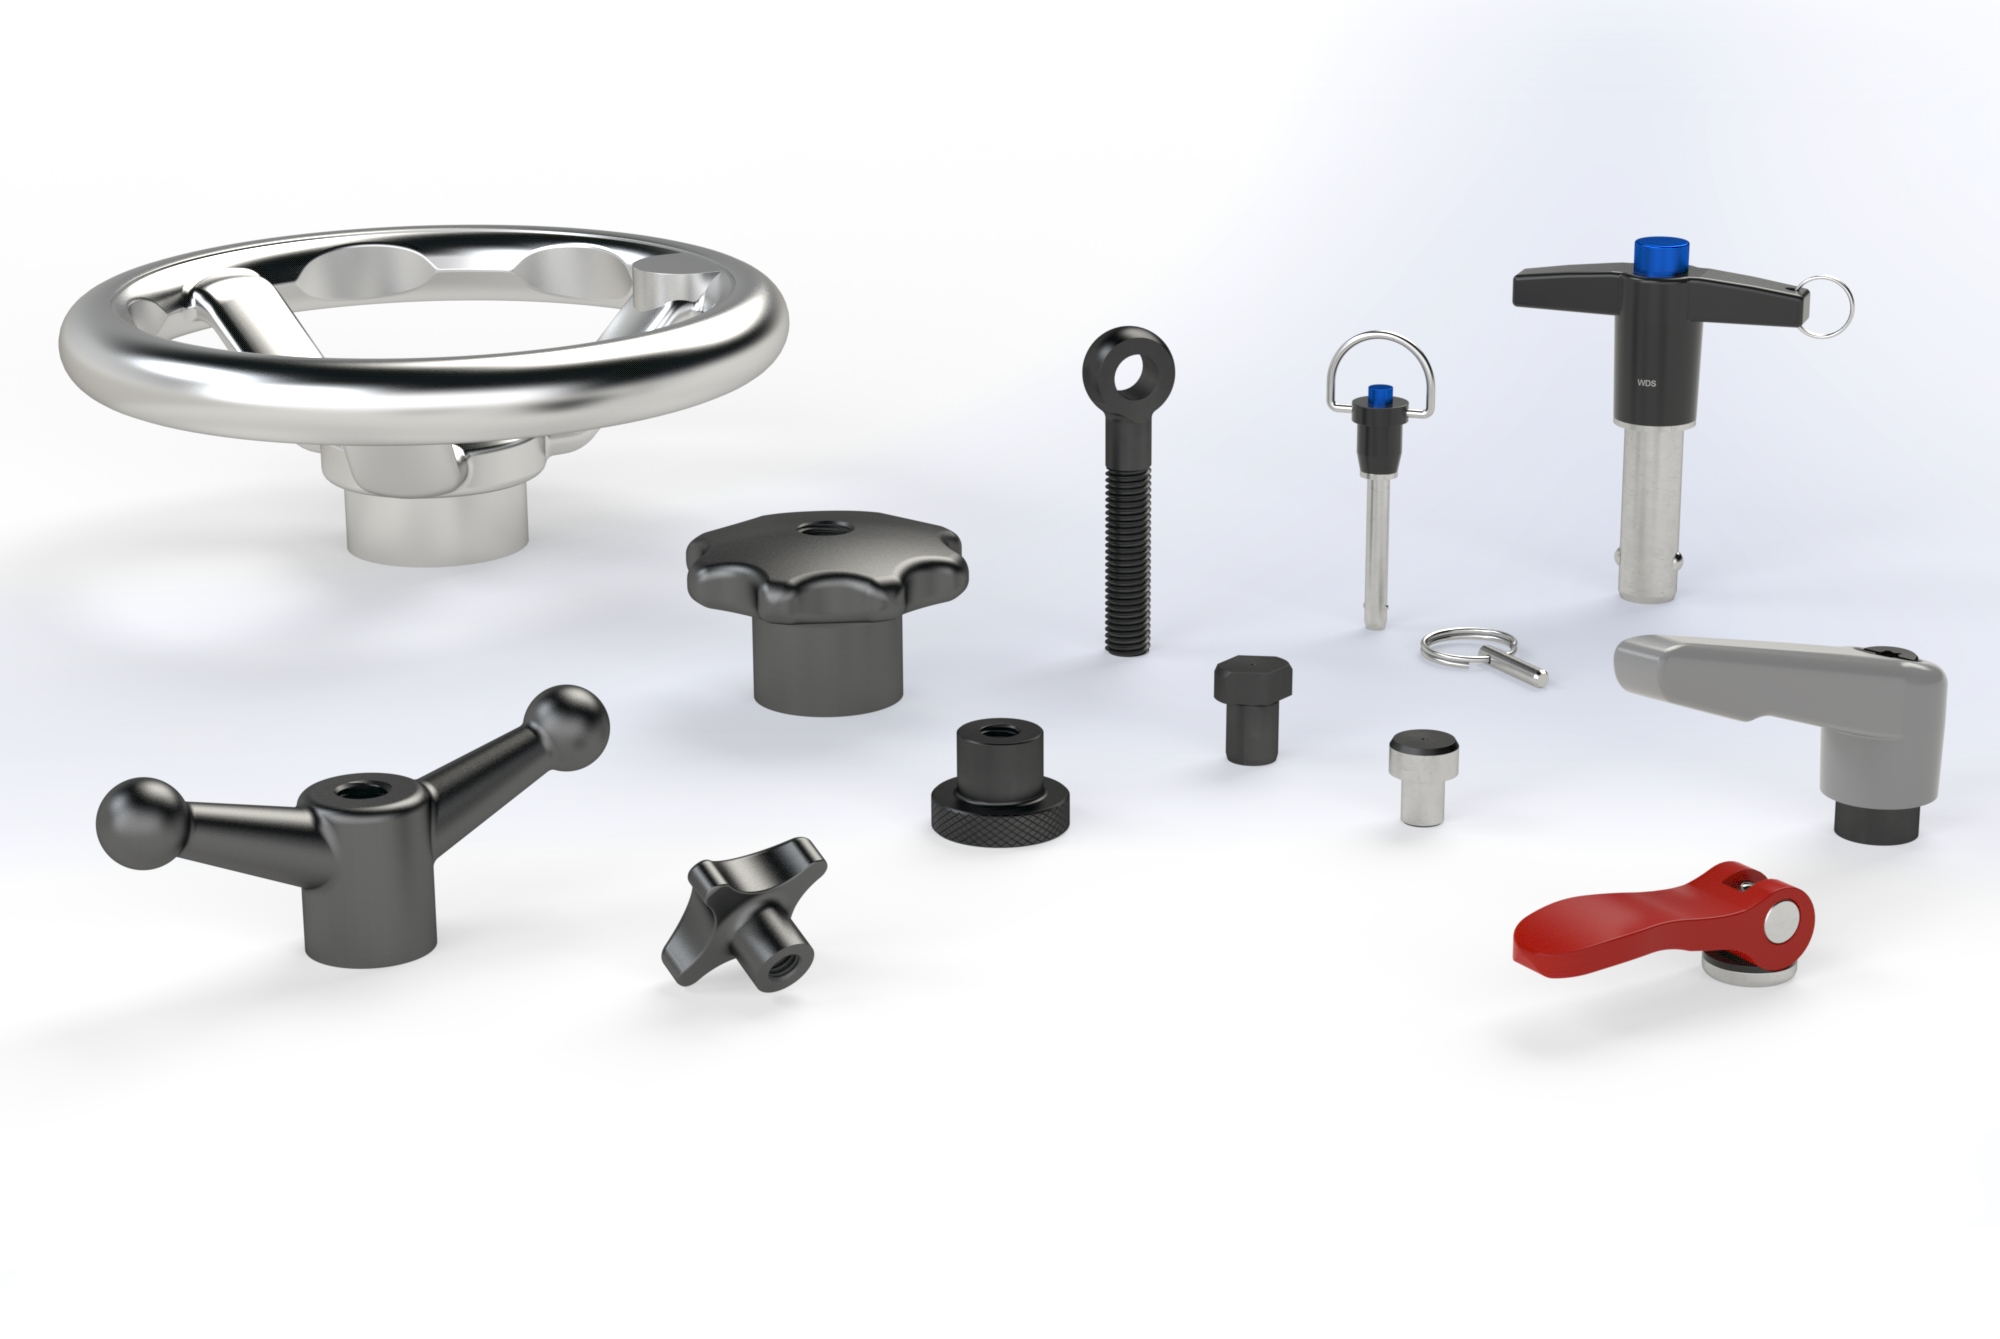 These new components join a wide range of existing inch-size products, from nuts and screws to levelling feet.